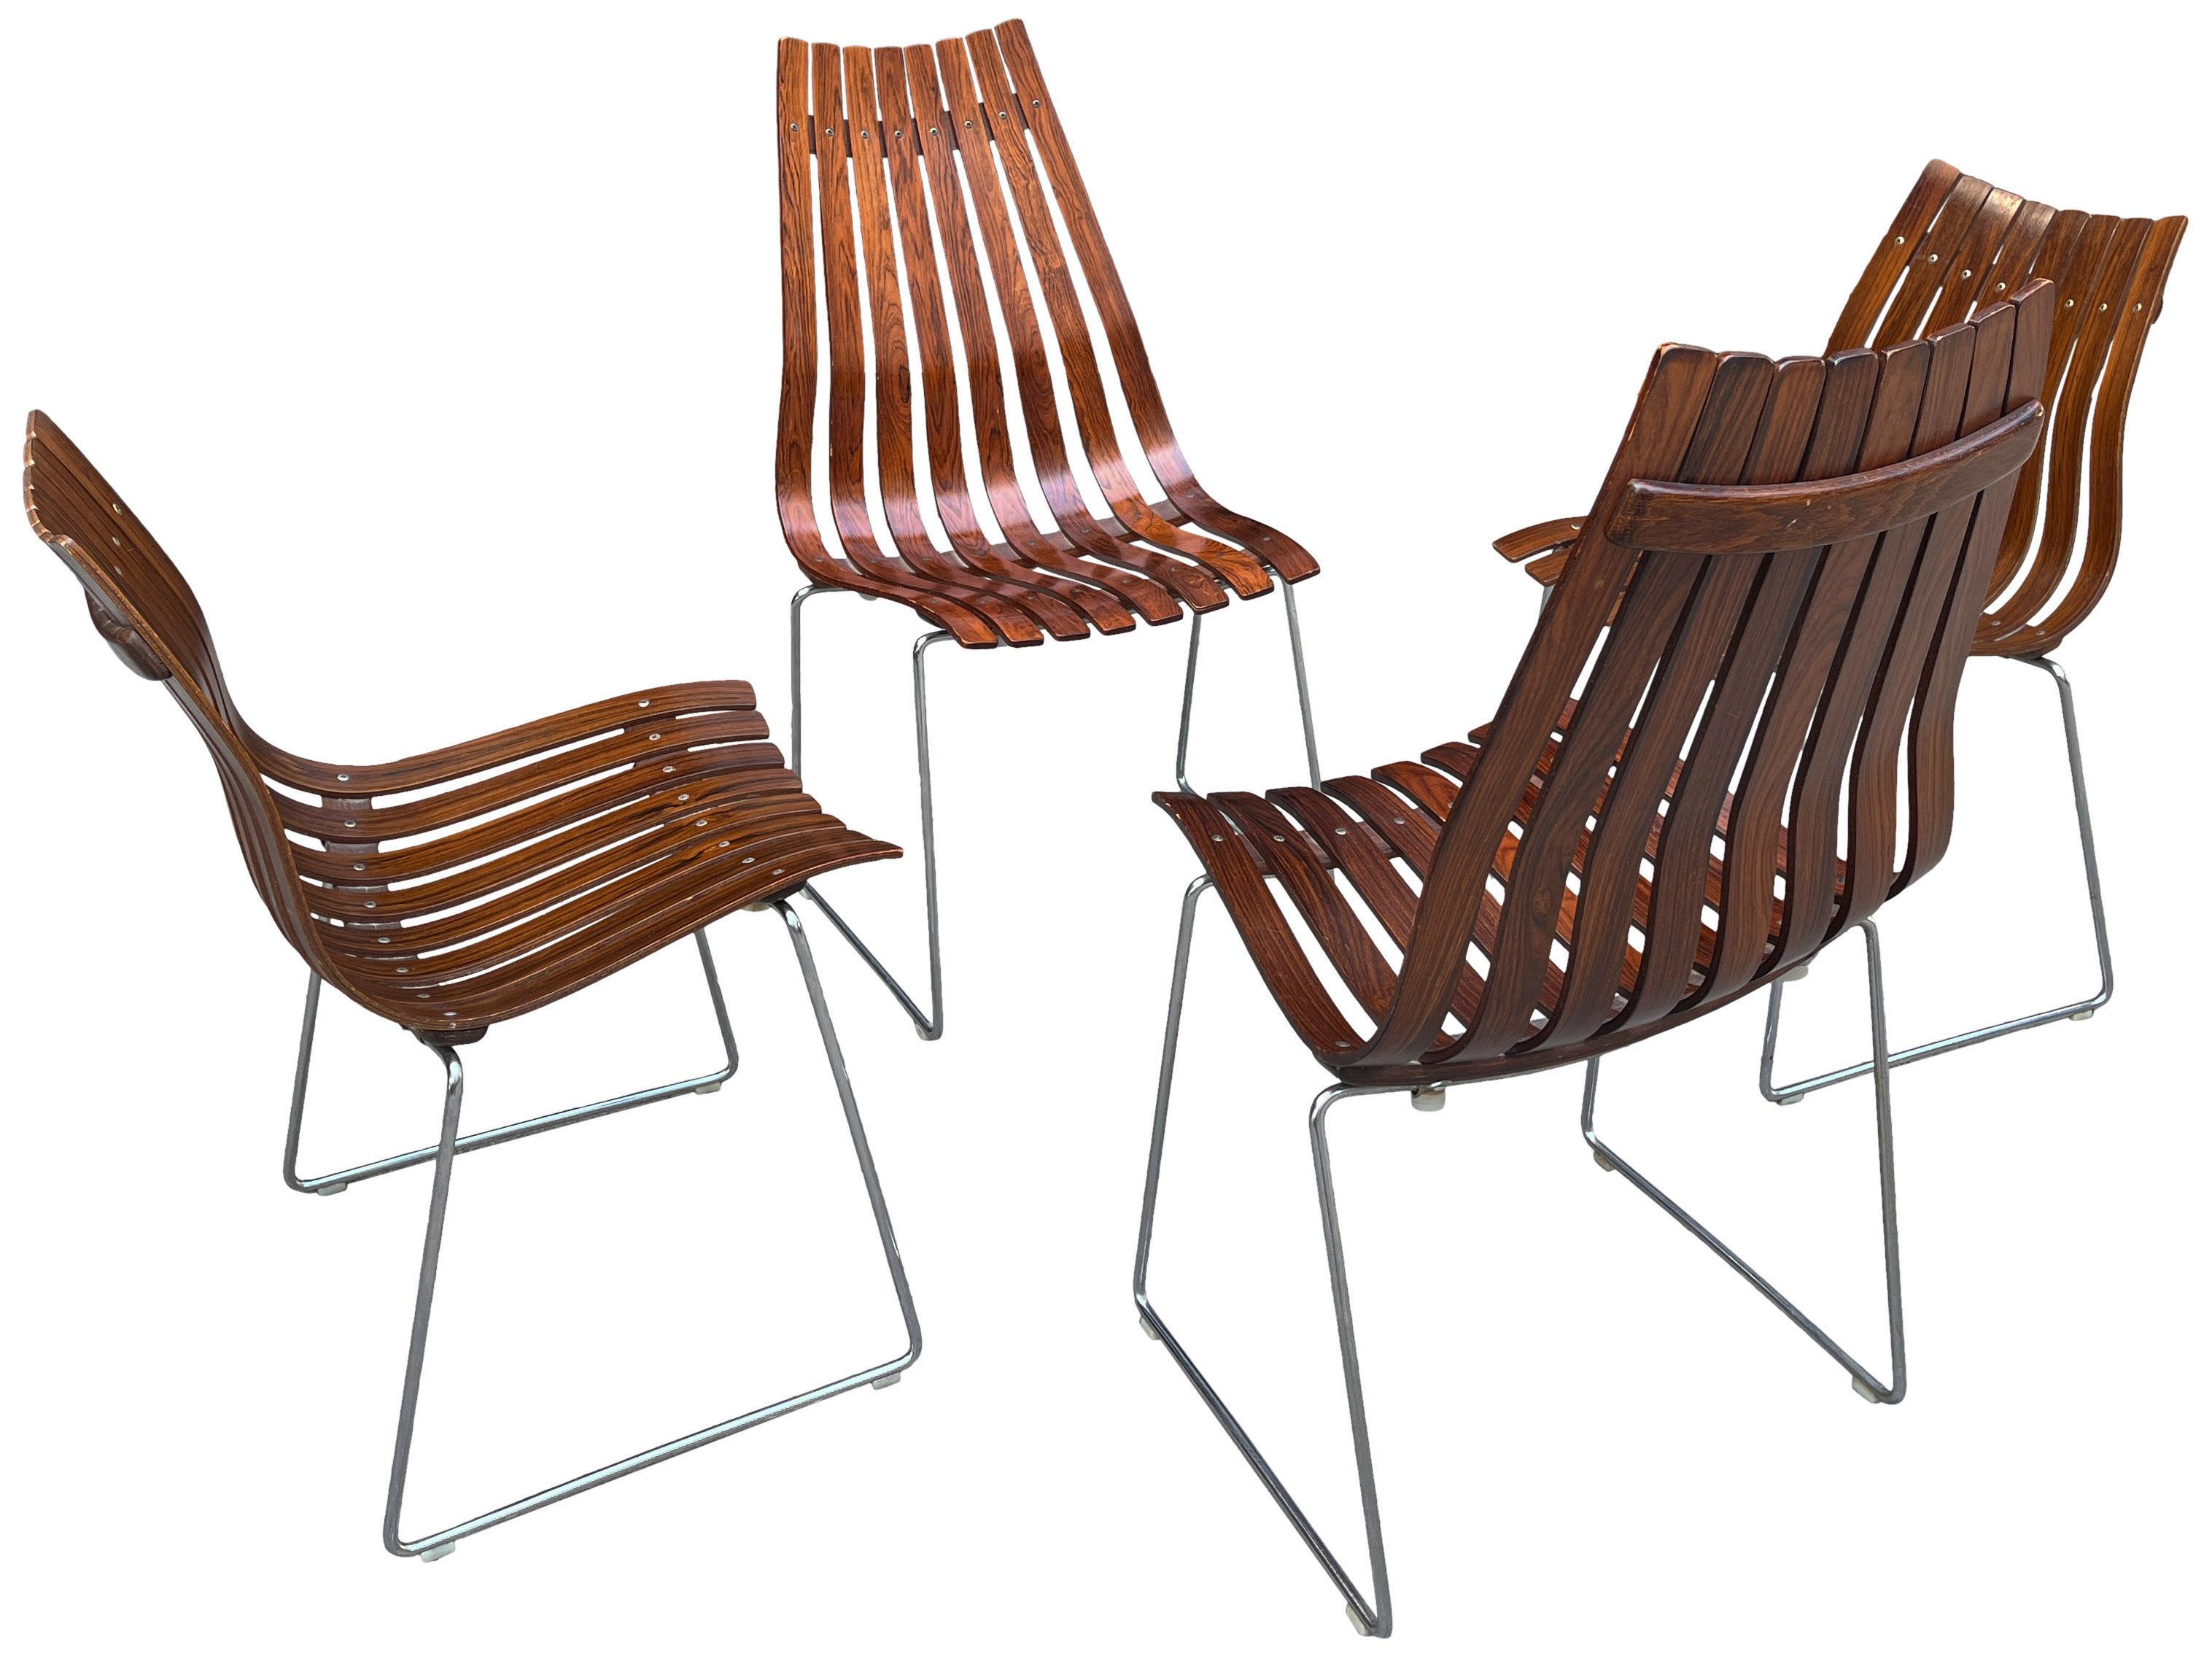 Midcentury Scandia Chairs by Hans Brattrud for Hove Mobler For Sale 4